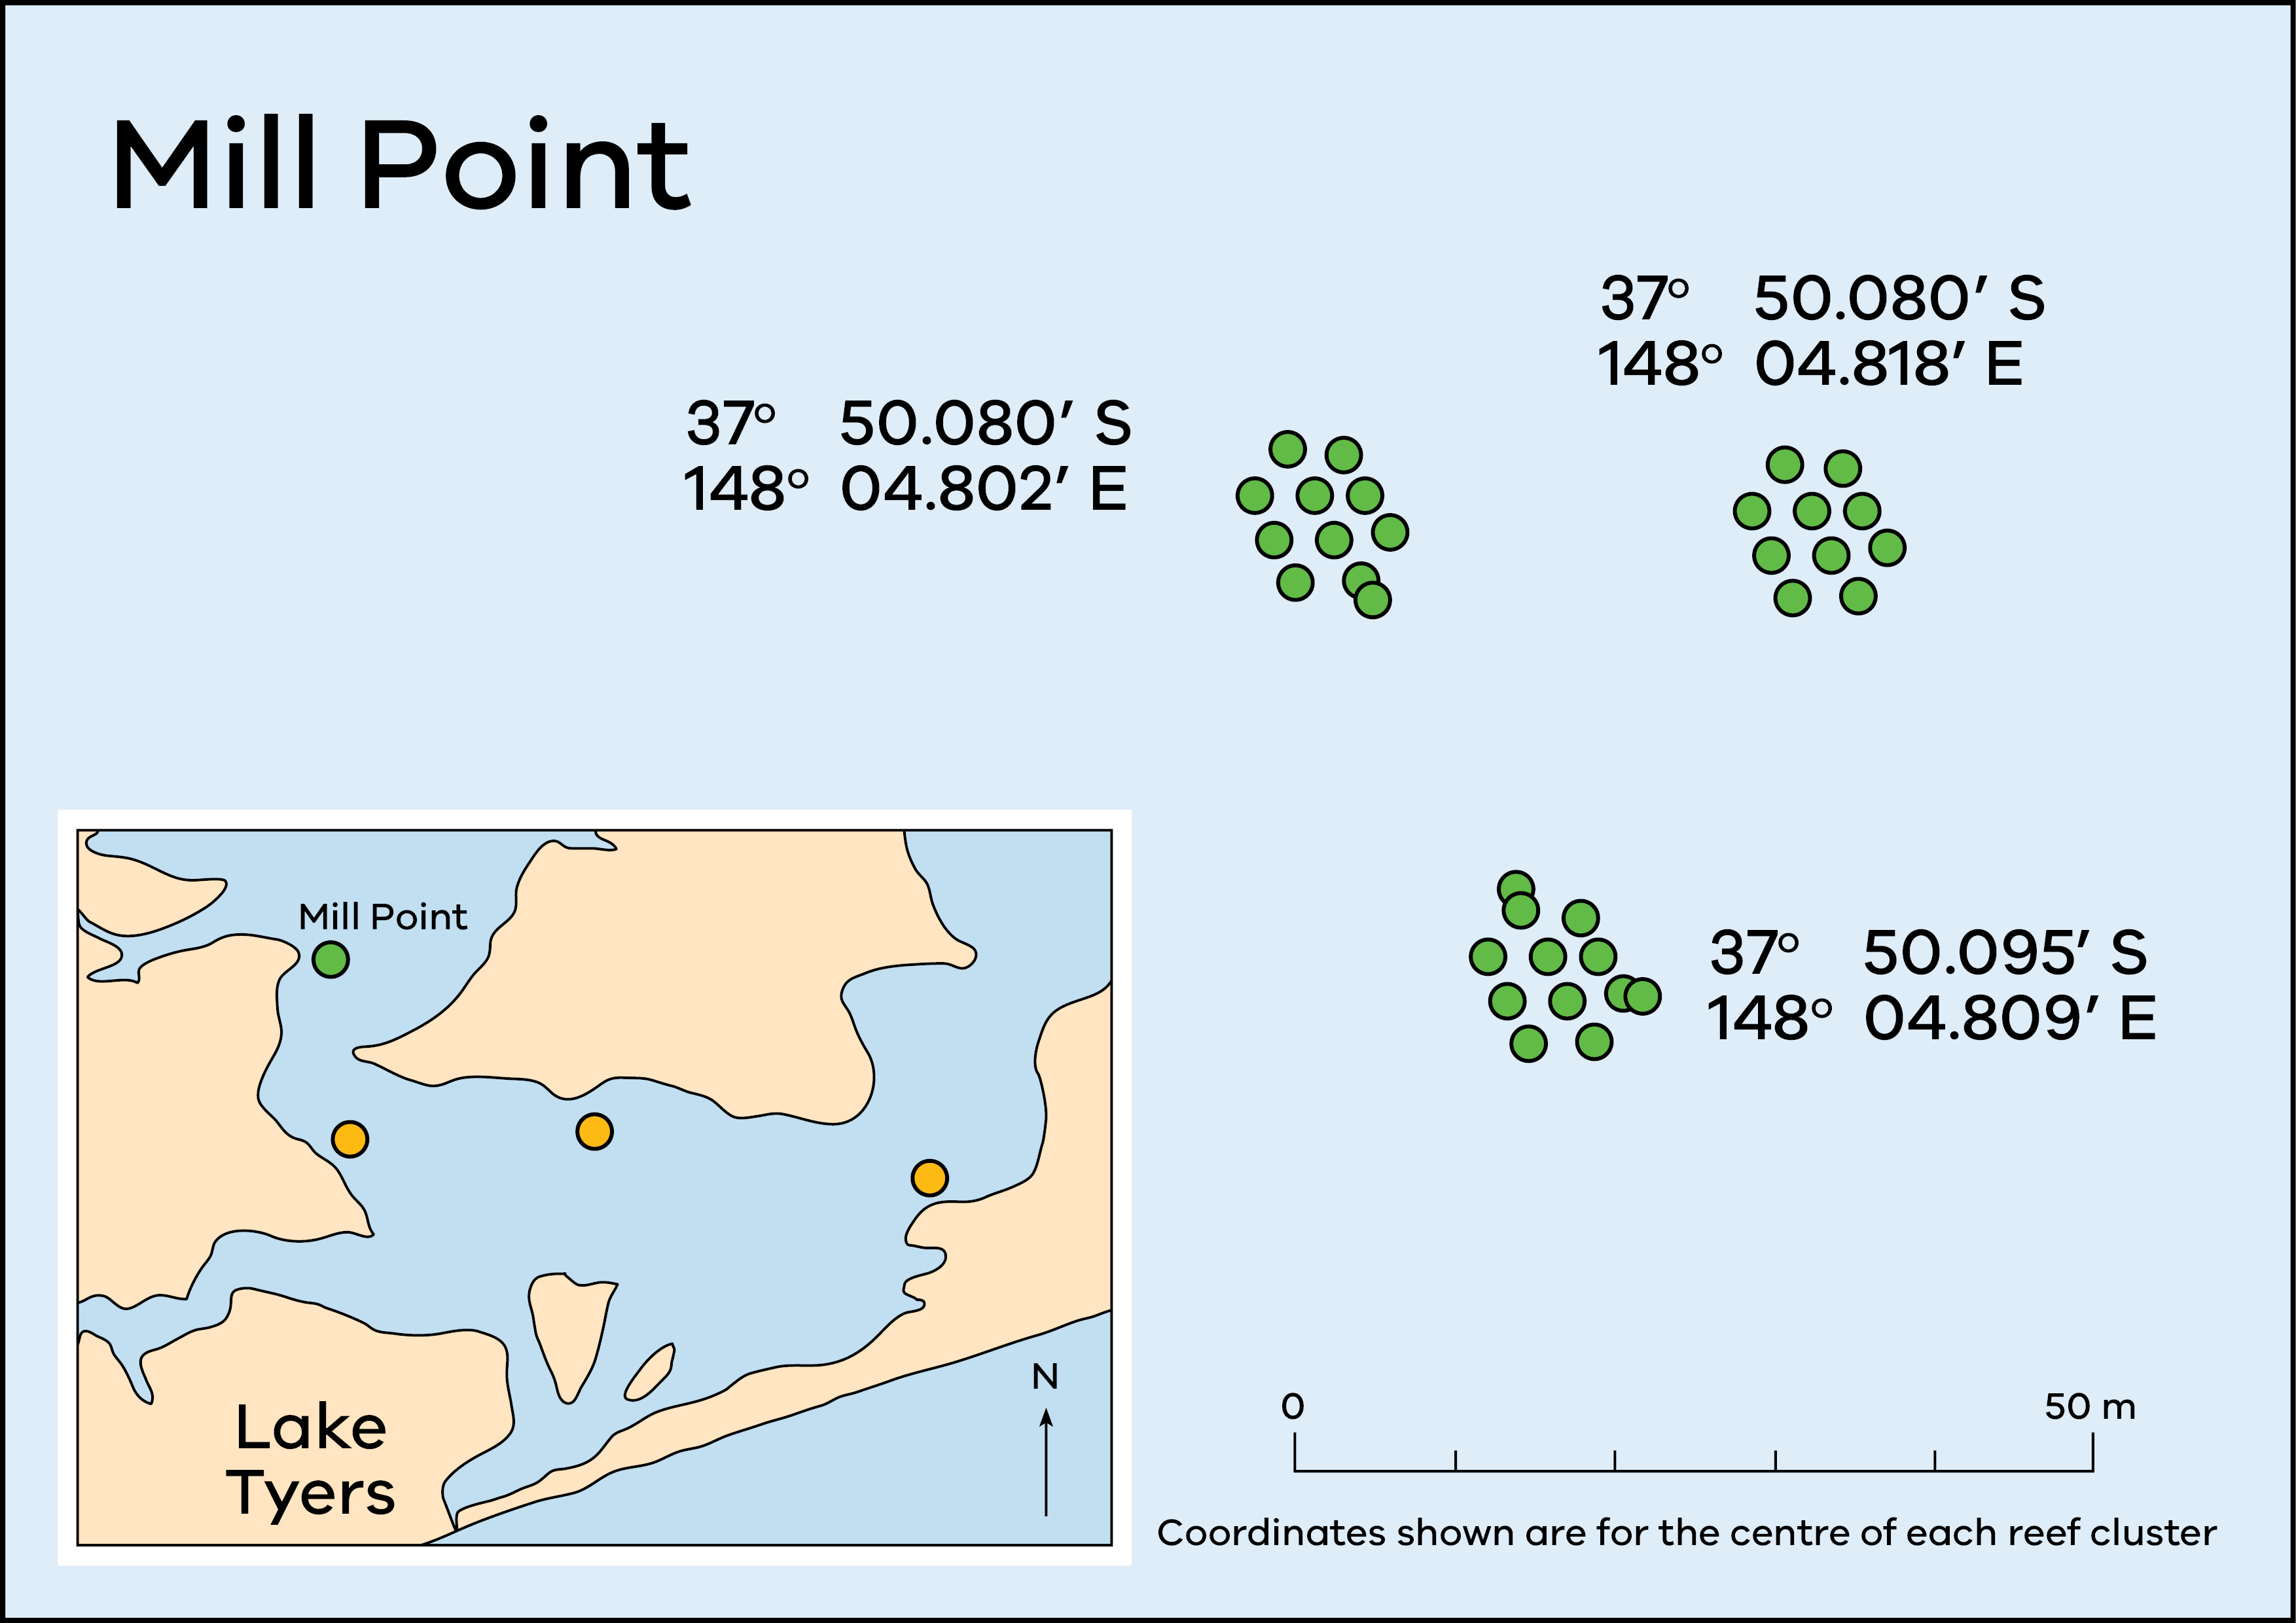 Map of Lake Tyers showing artificial reef locations at Mill Point.